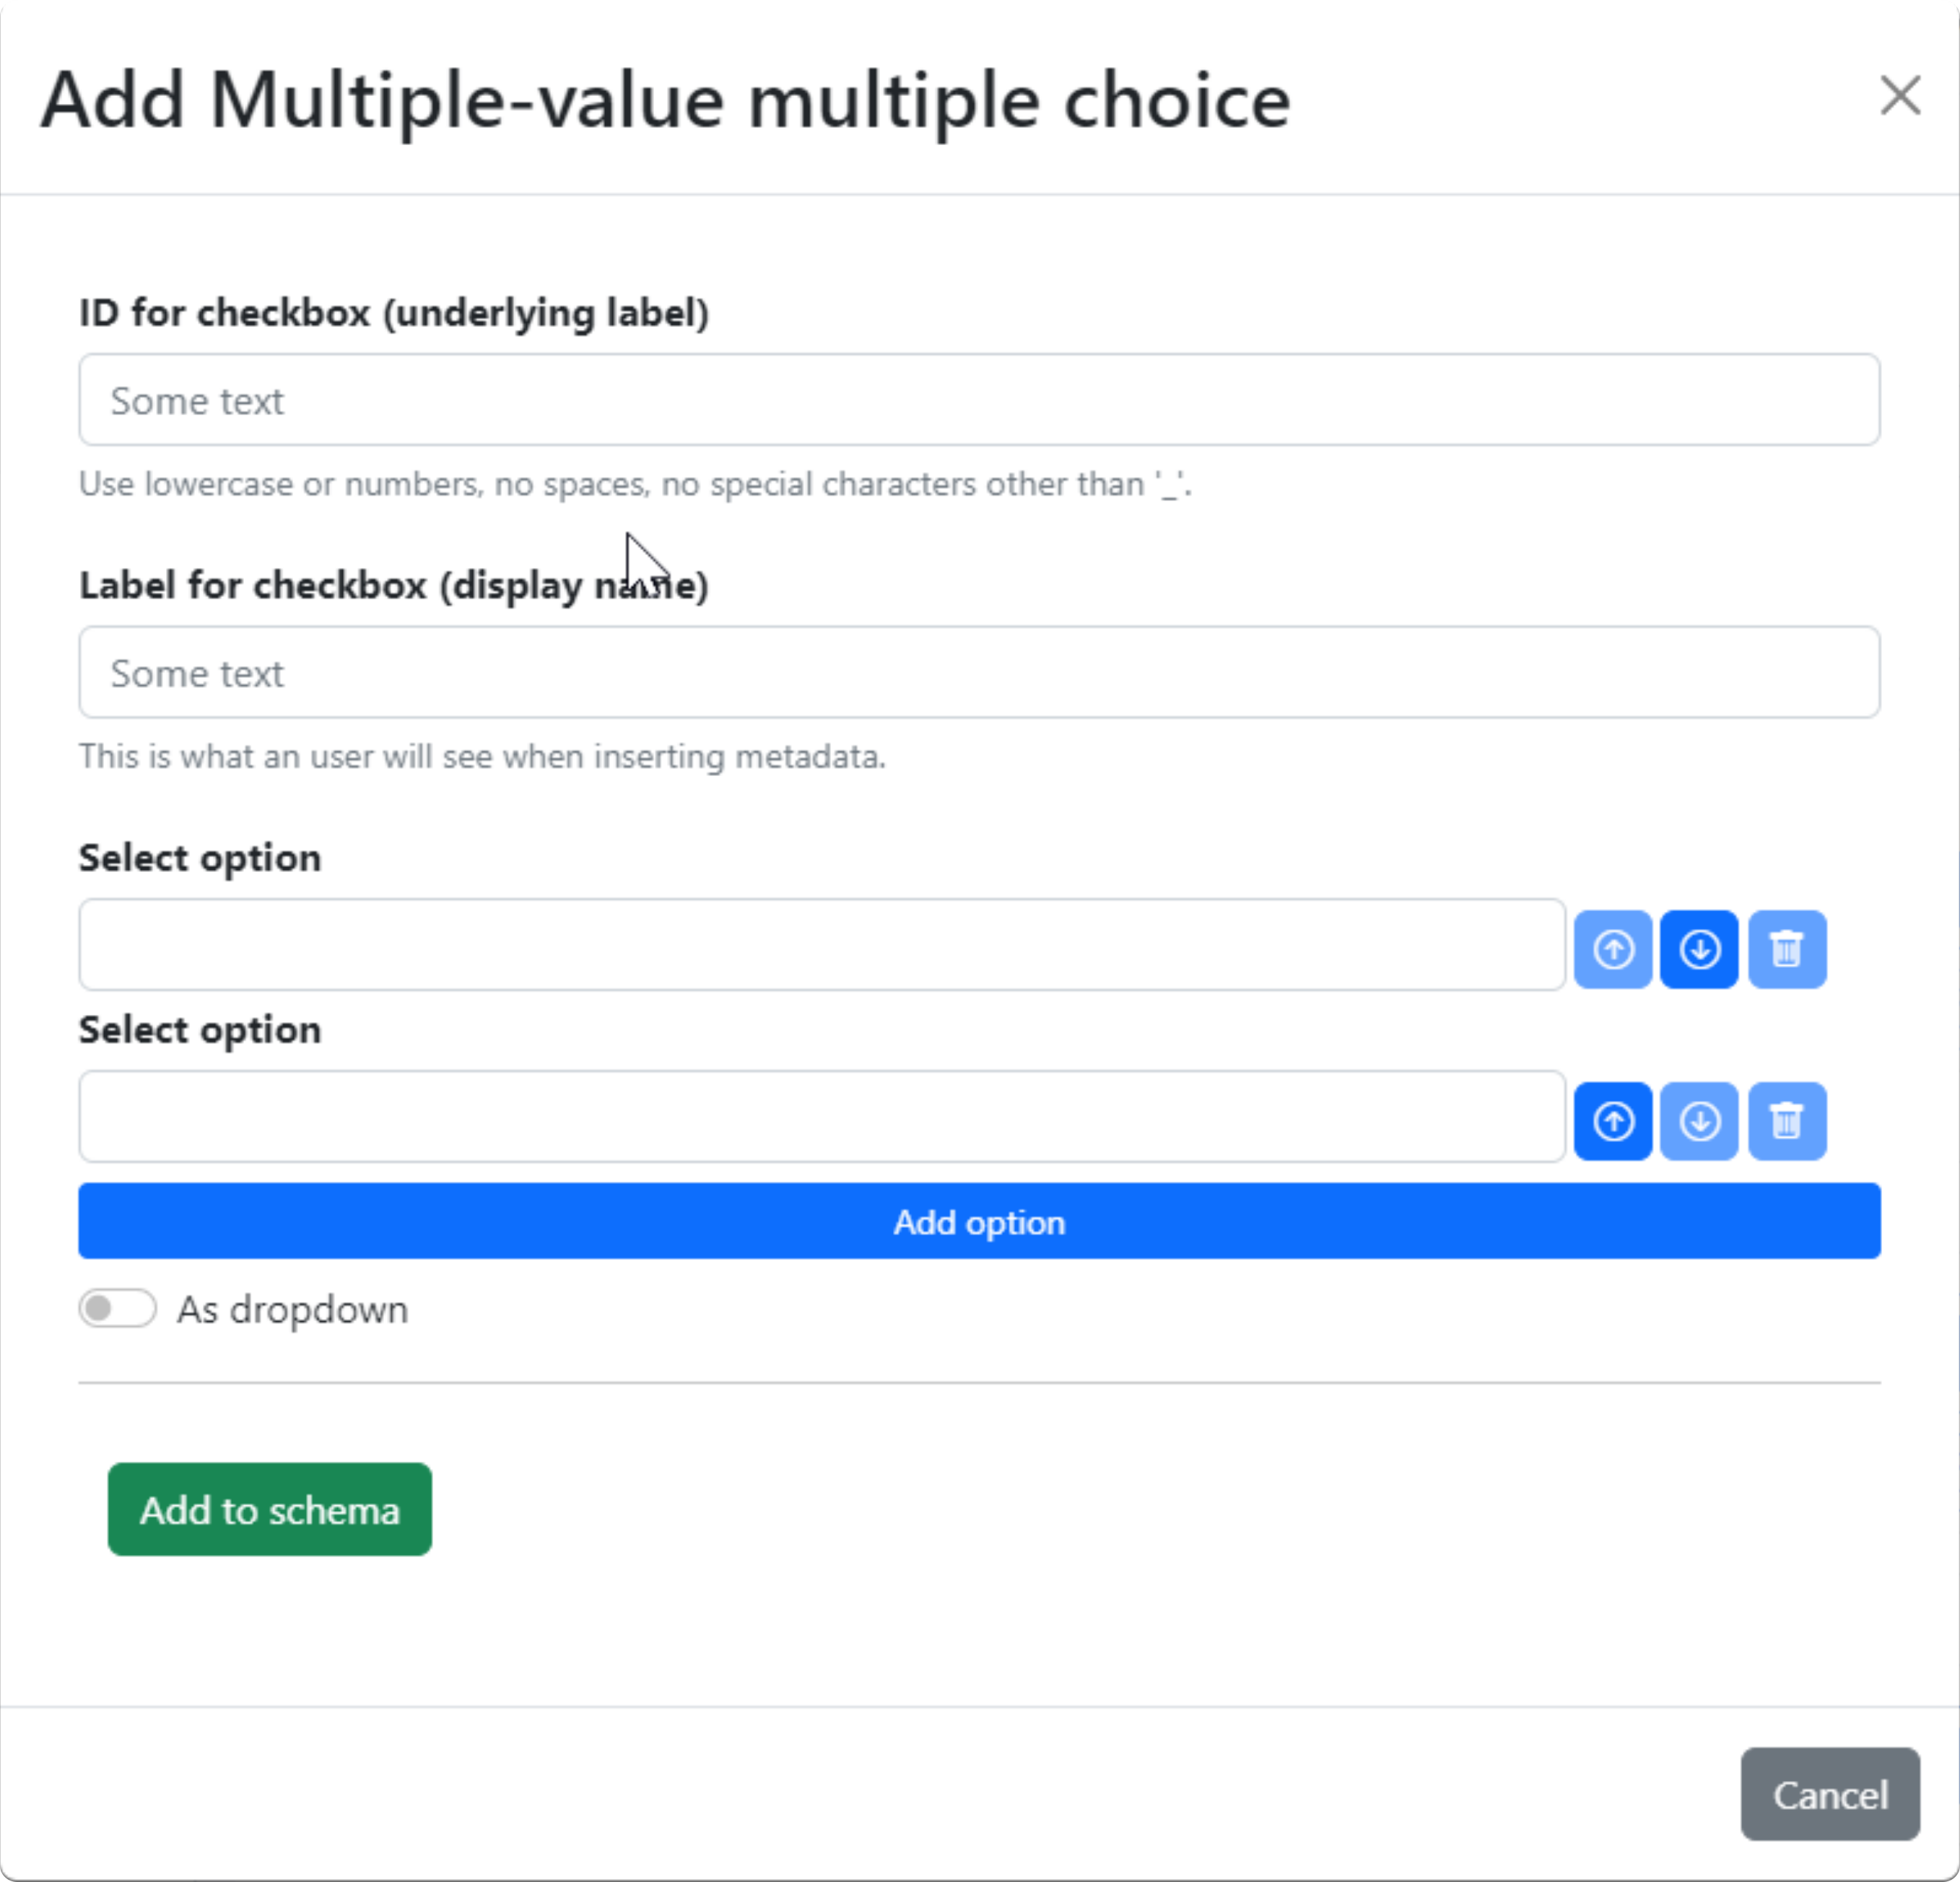 Form to create a multiple-value multiple-choice field.